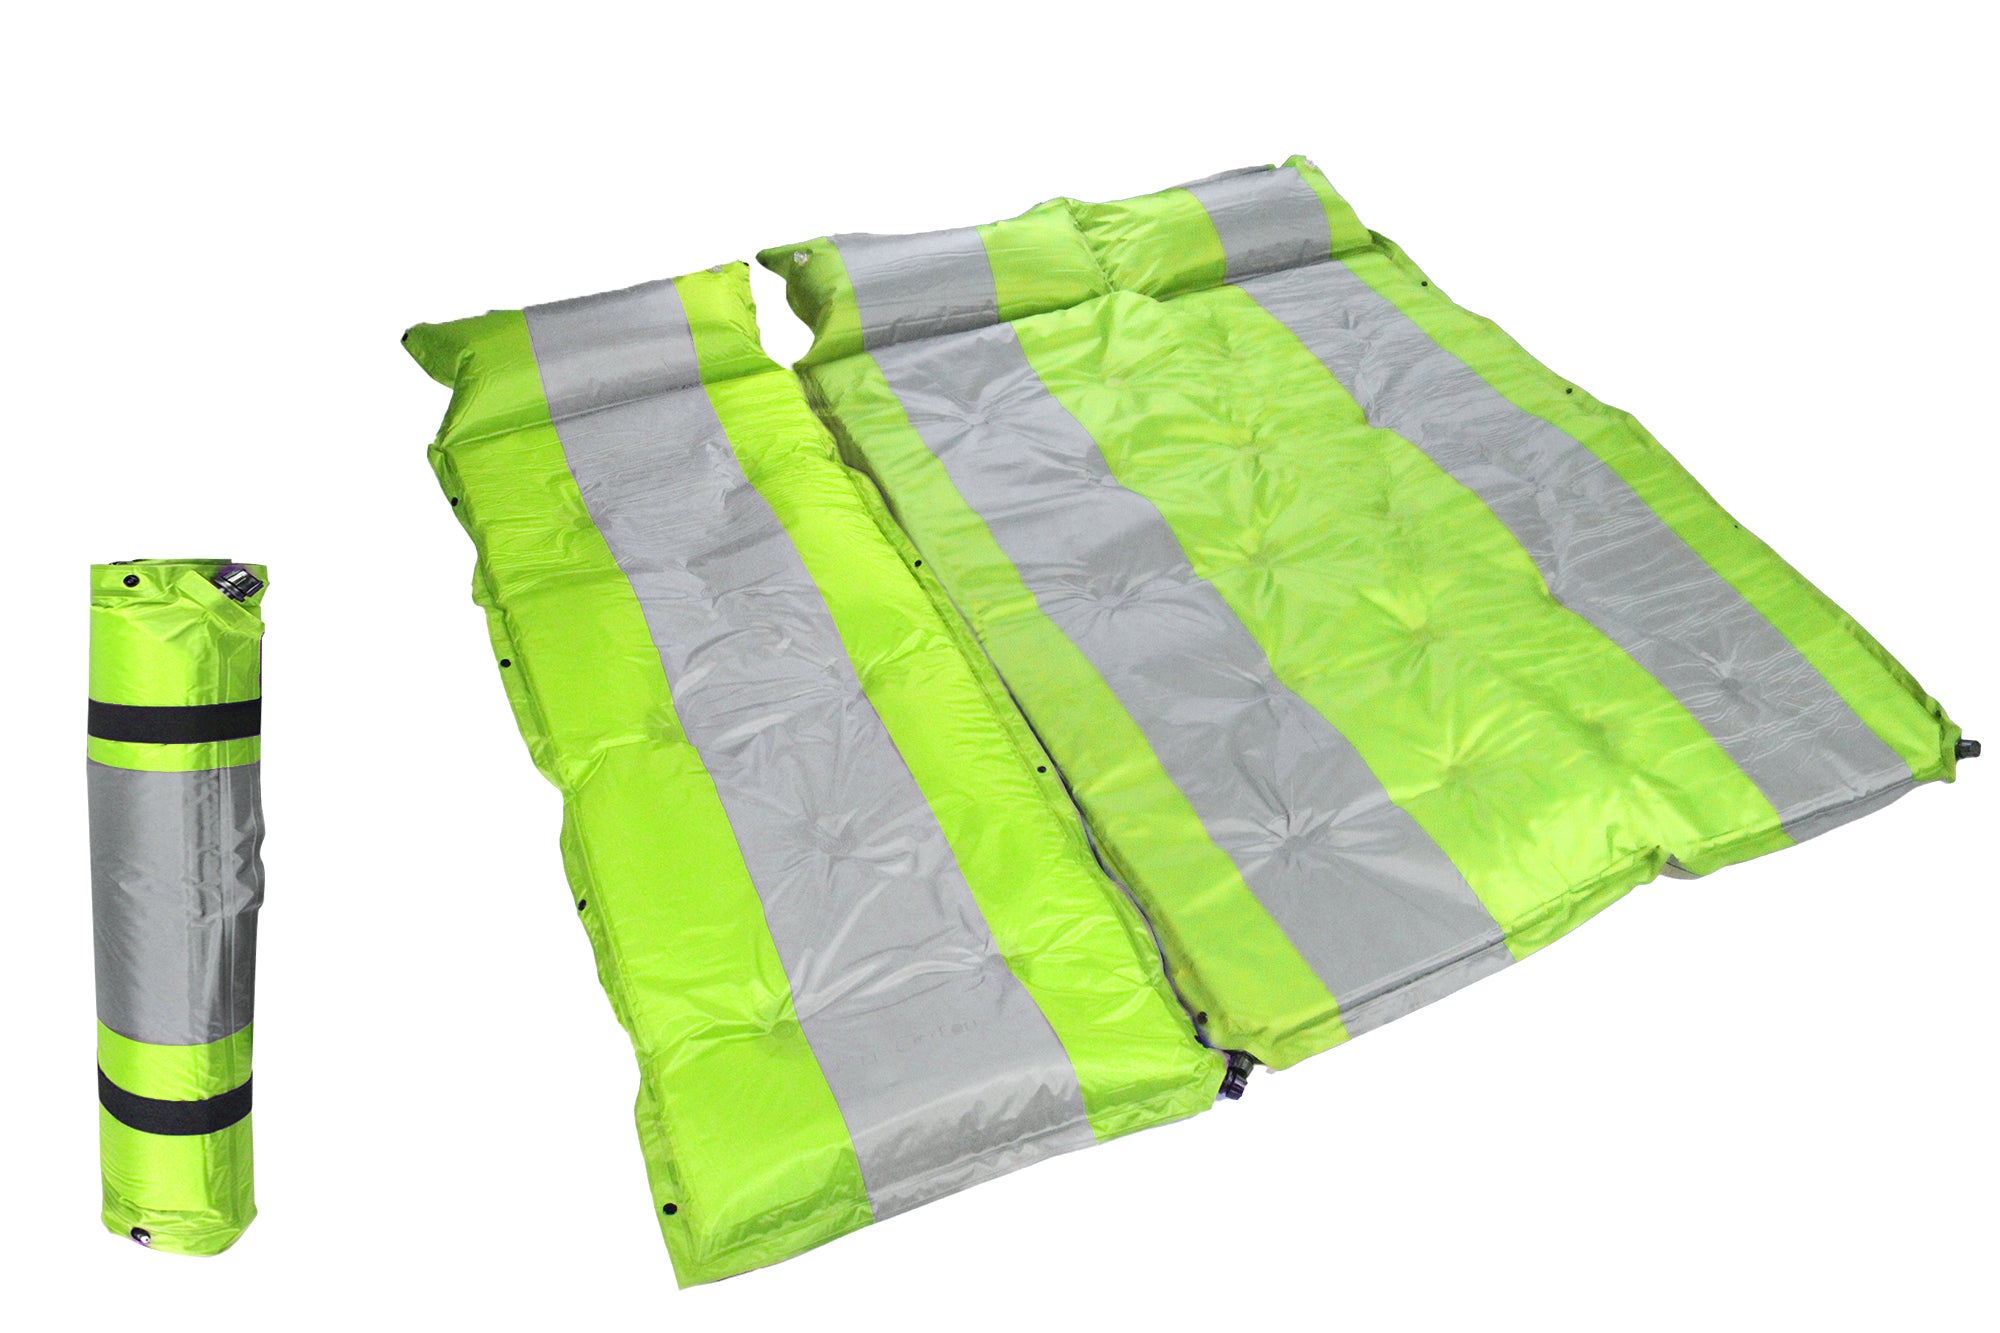 184x180cm Self-Inflating Triple Camping Mattress with Inflatable Headrests